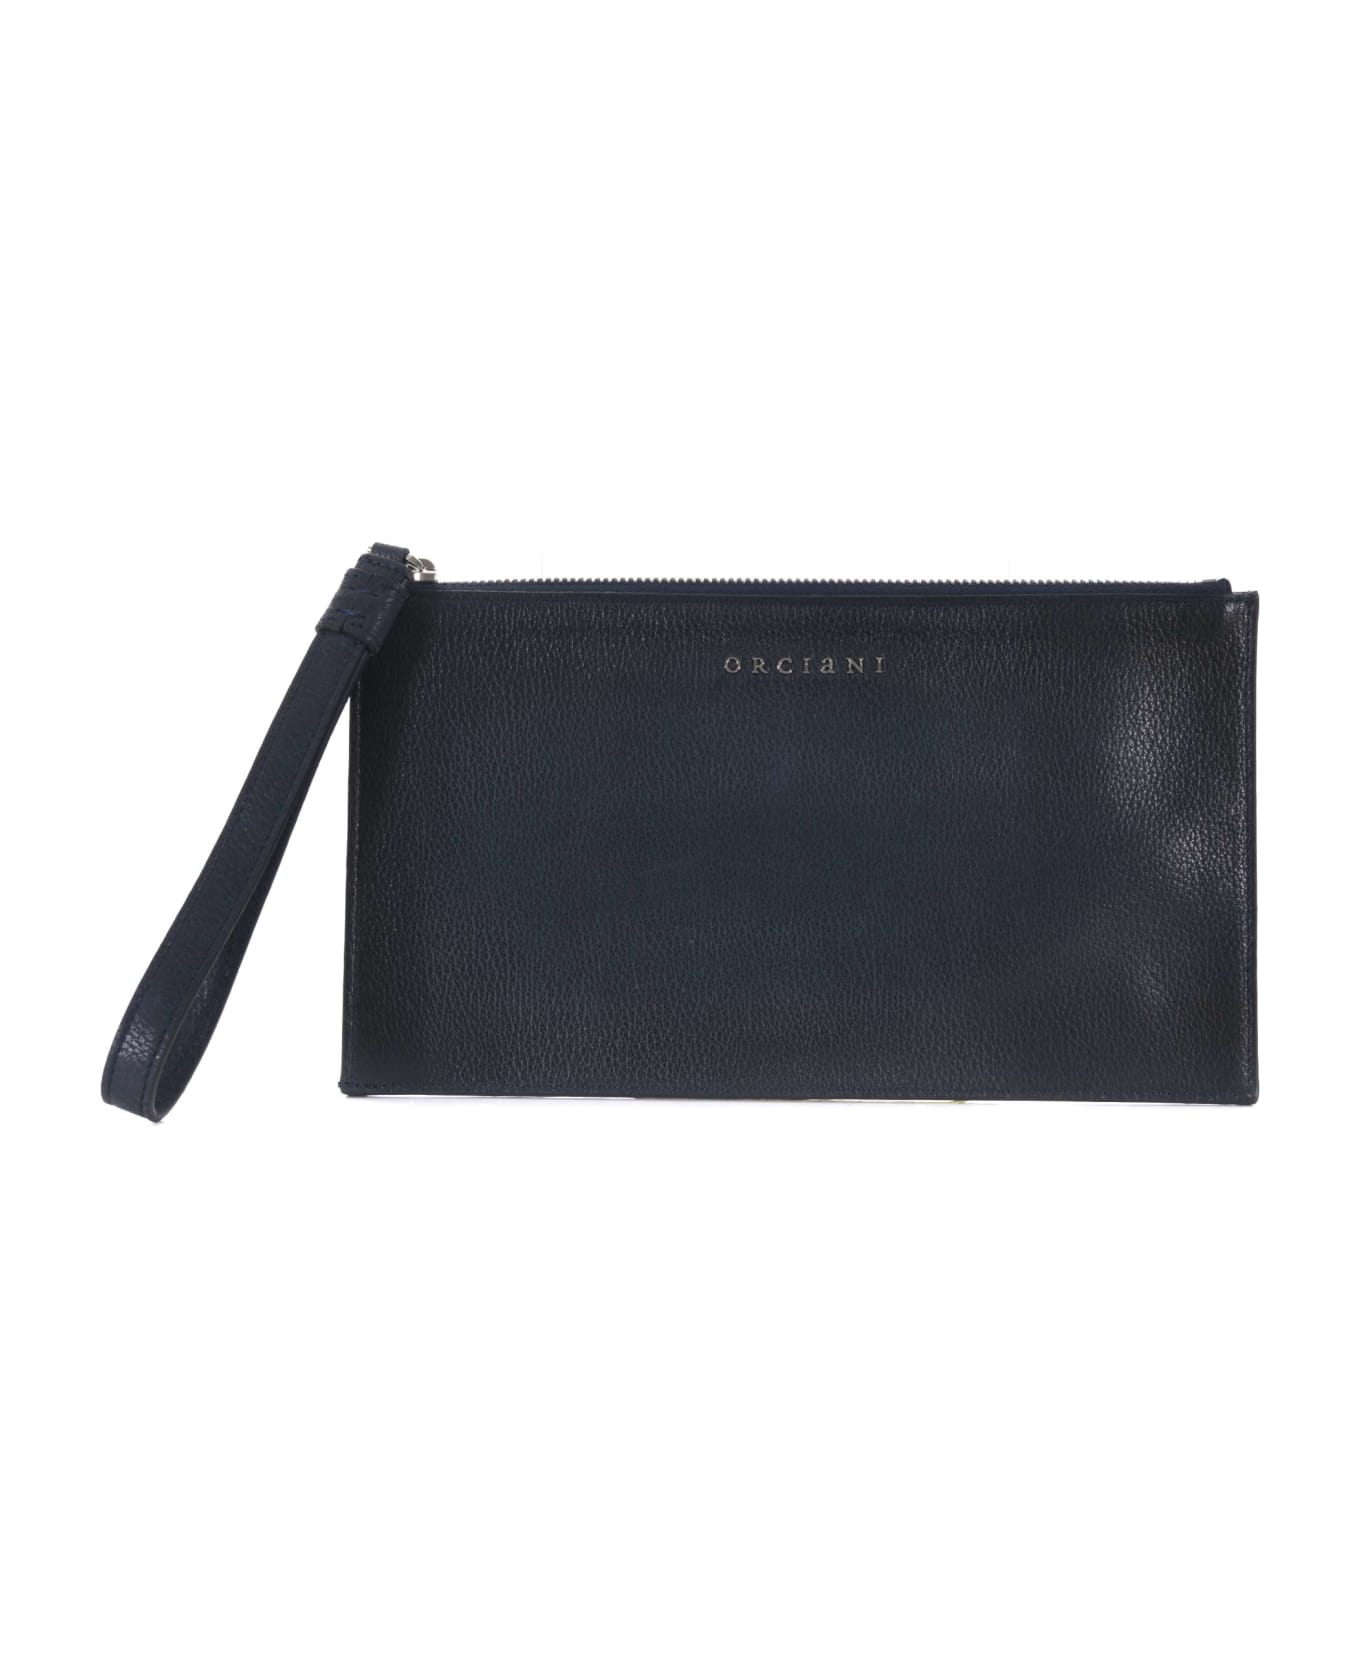 Orciani Clutch Bag - Blu scuro トラベルバッグ